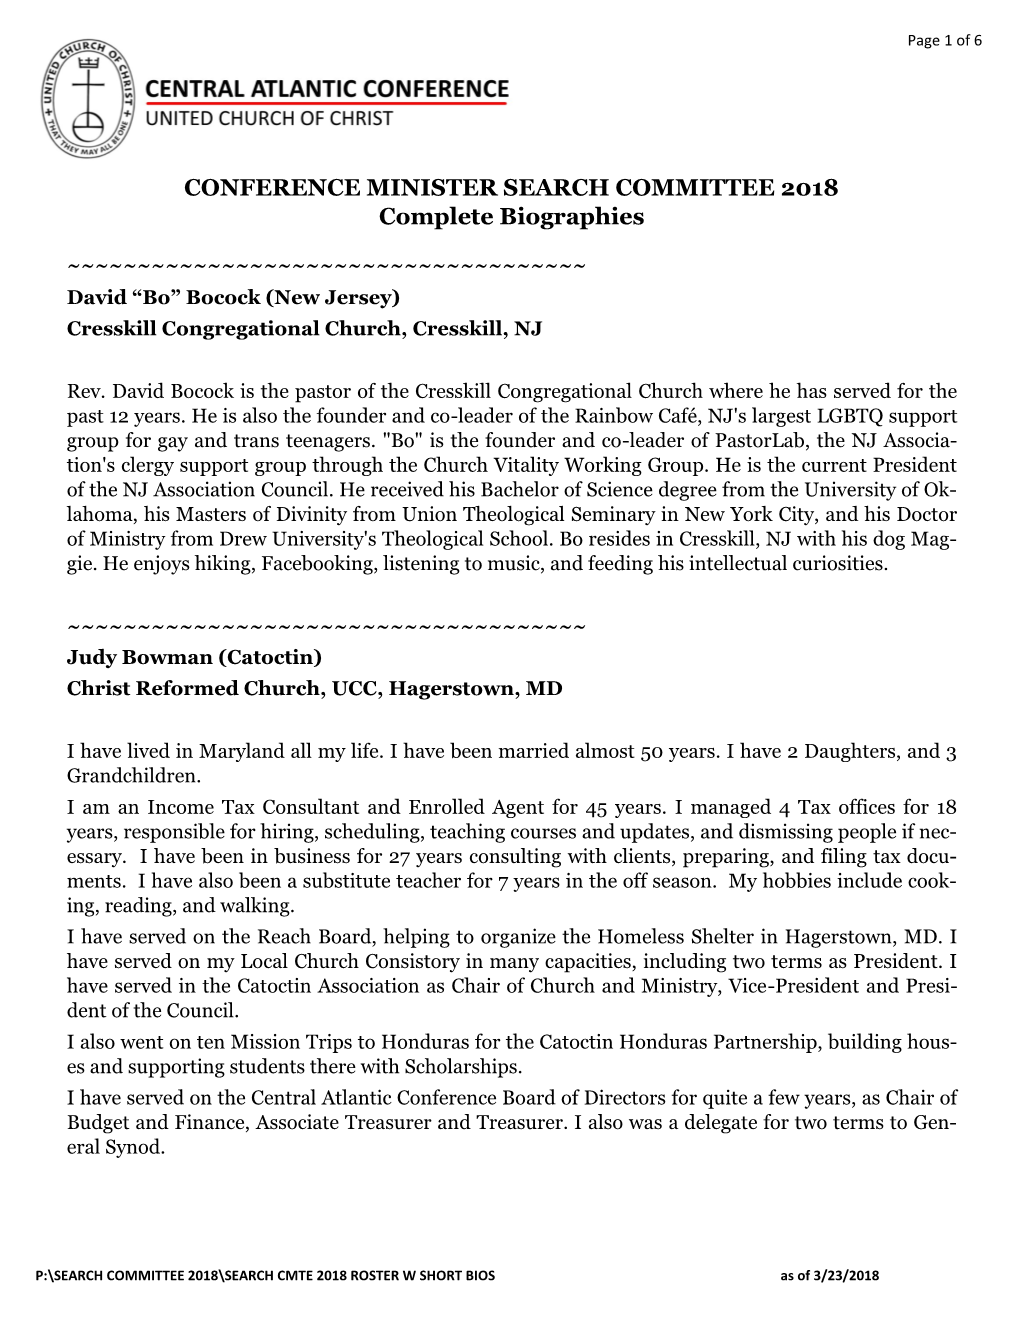 CONFERENCE MINISTER SEARCH COMMITTEE 2018 Complete Biographies